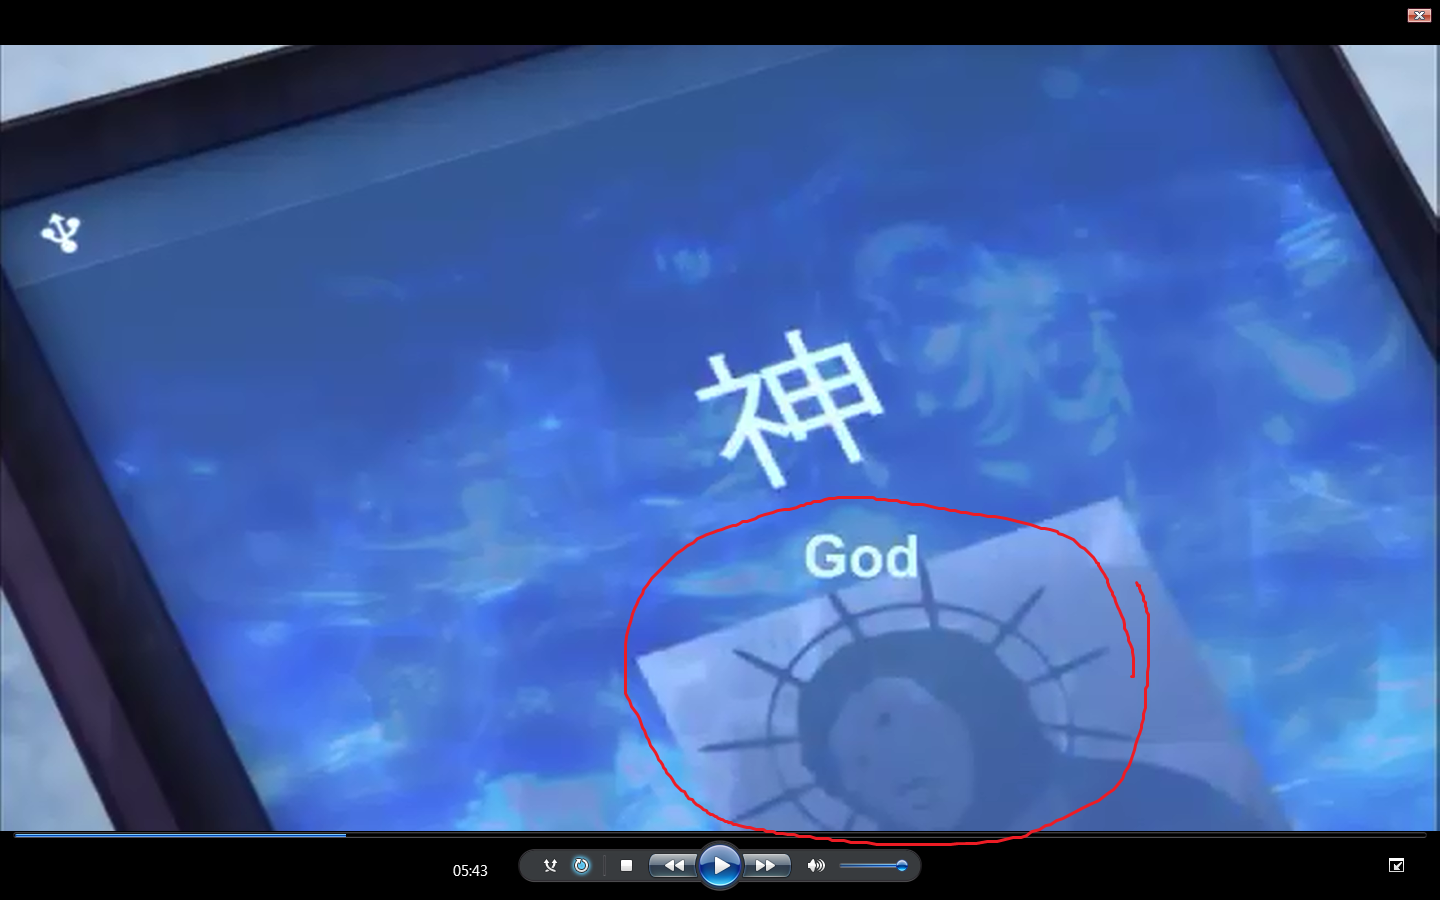 watching anime when suddenly...